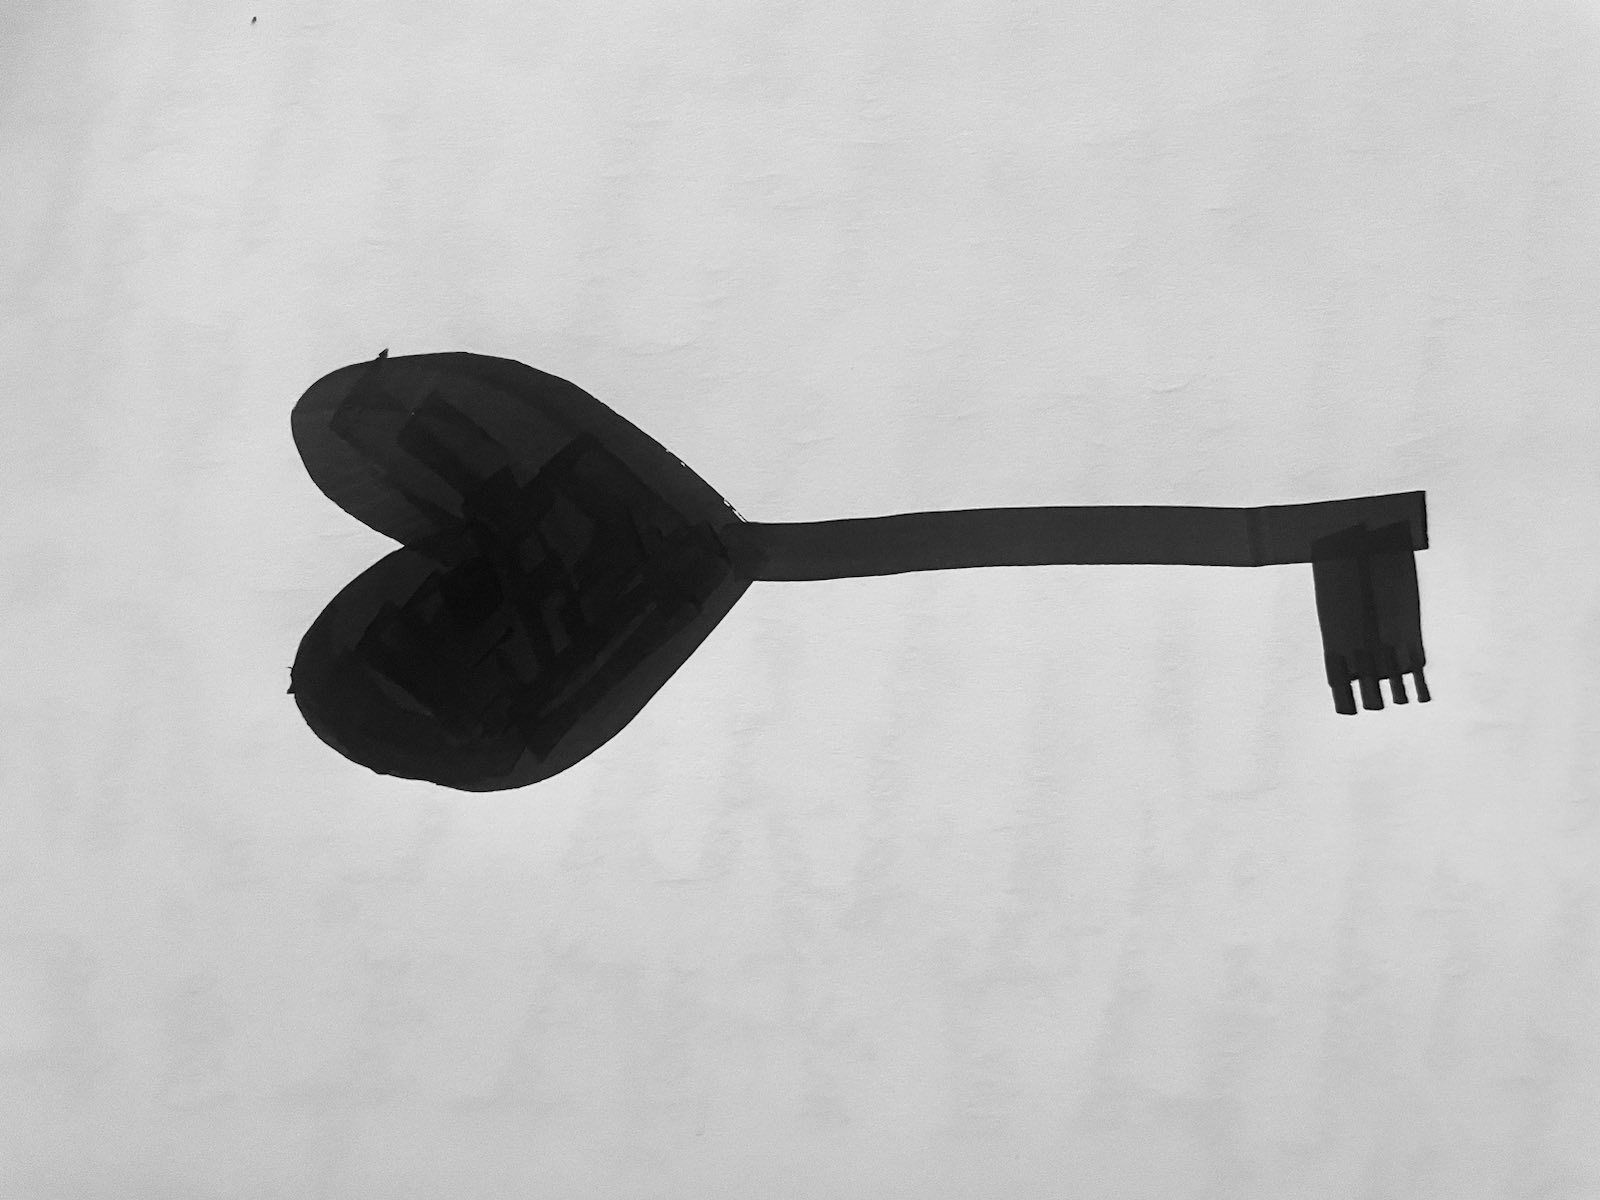 A drawing of a key